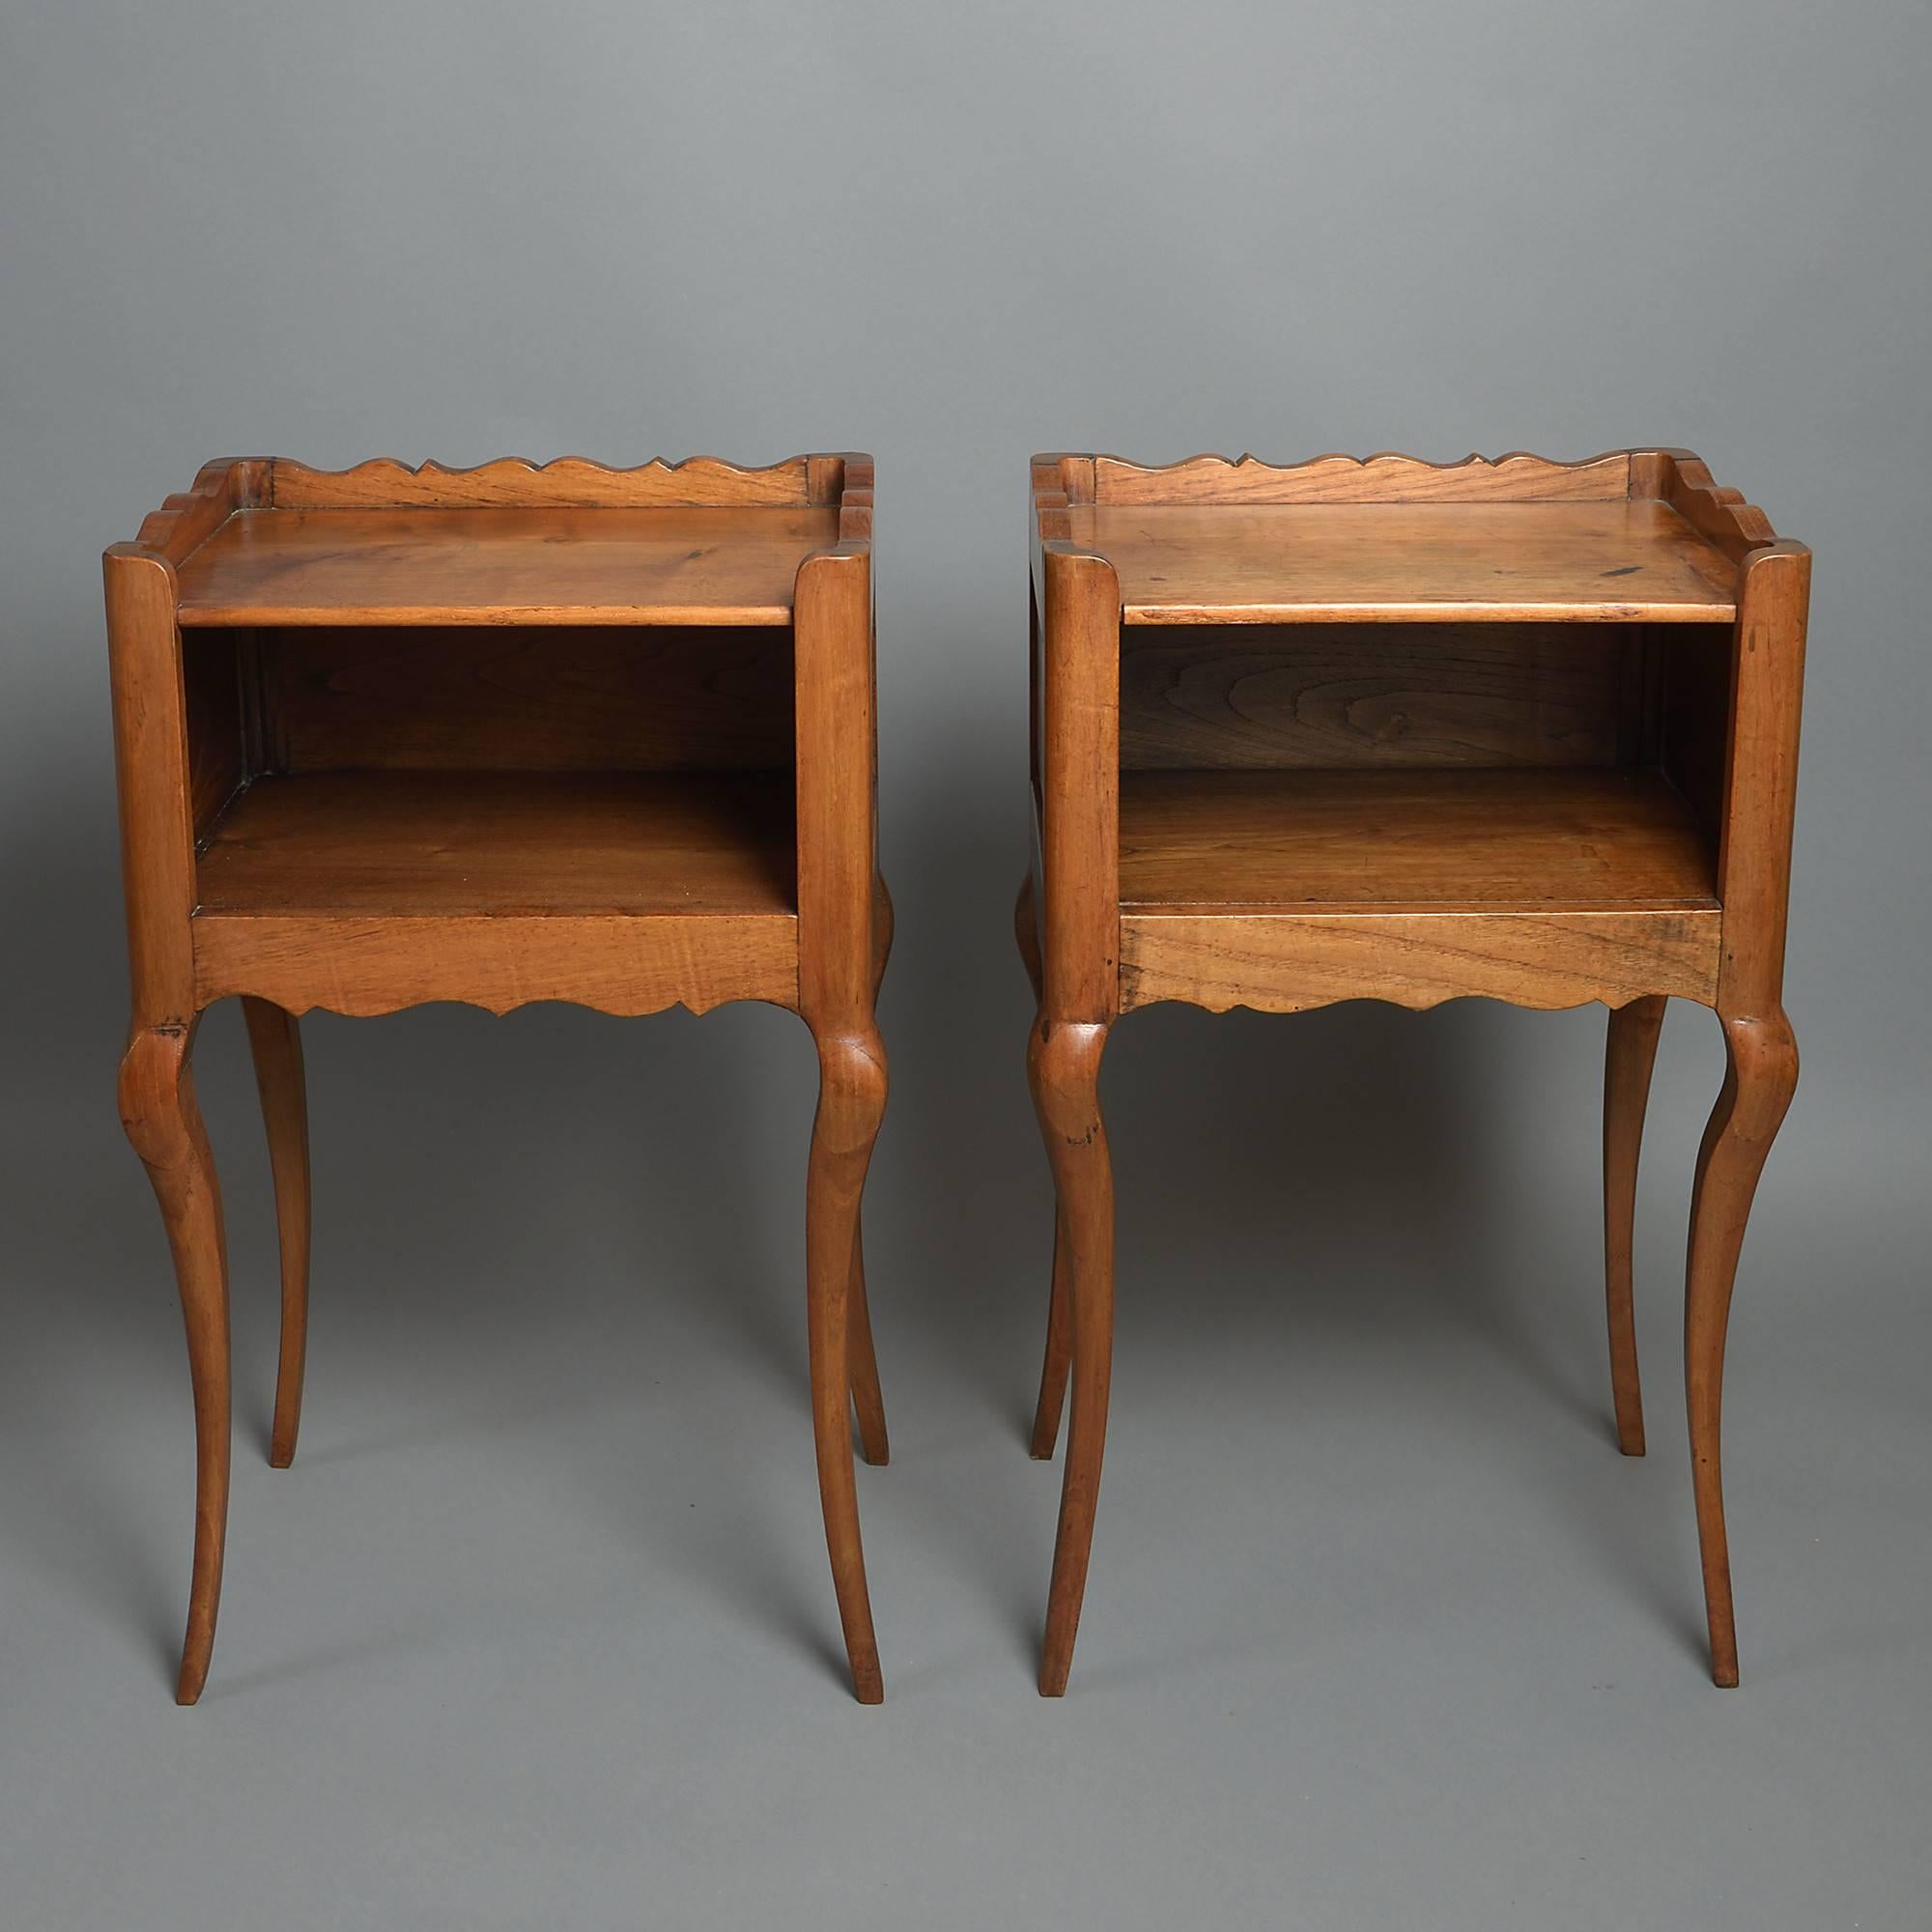 A fine early 20th century pair of bedside tables, the top shelves with shaped galleries above open compartments, the sides and backs with fielded panels, all set upon generously carved cabriole legs.